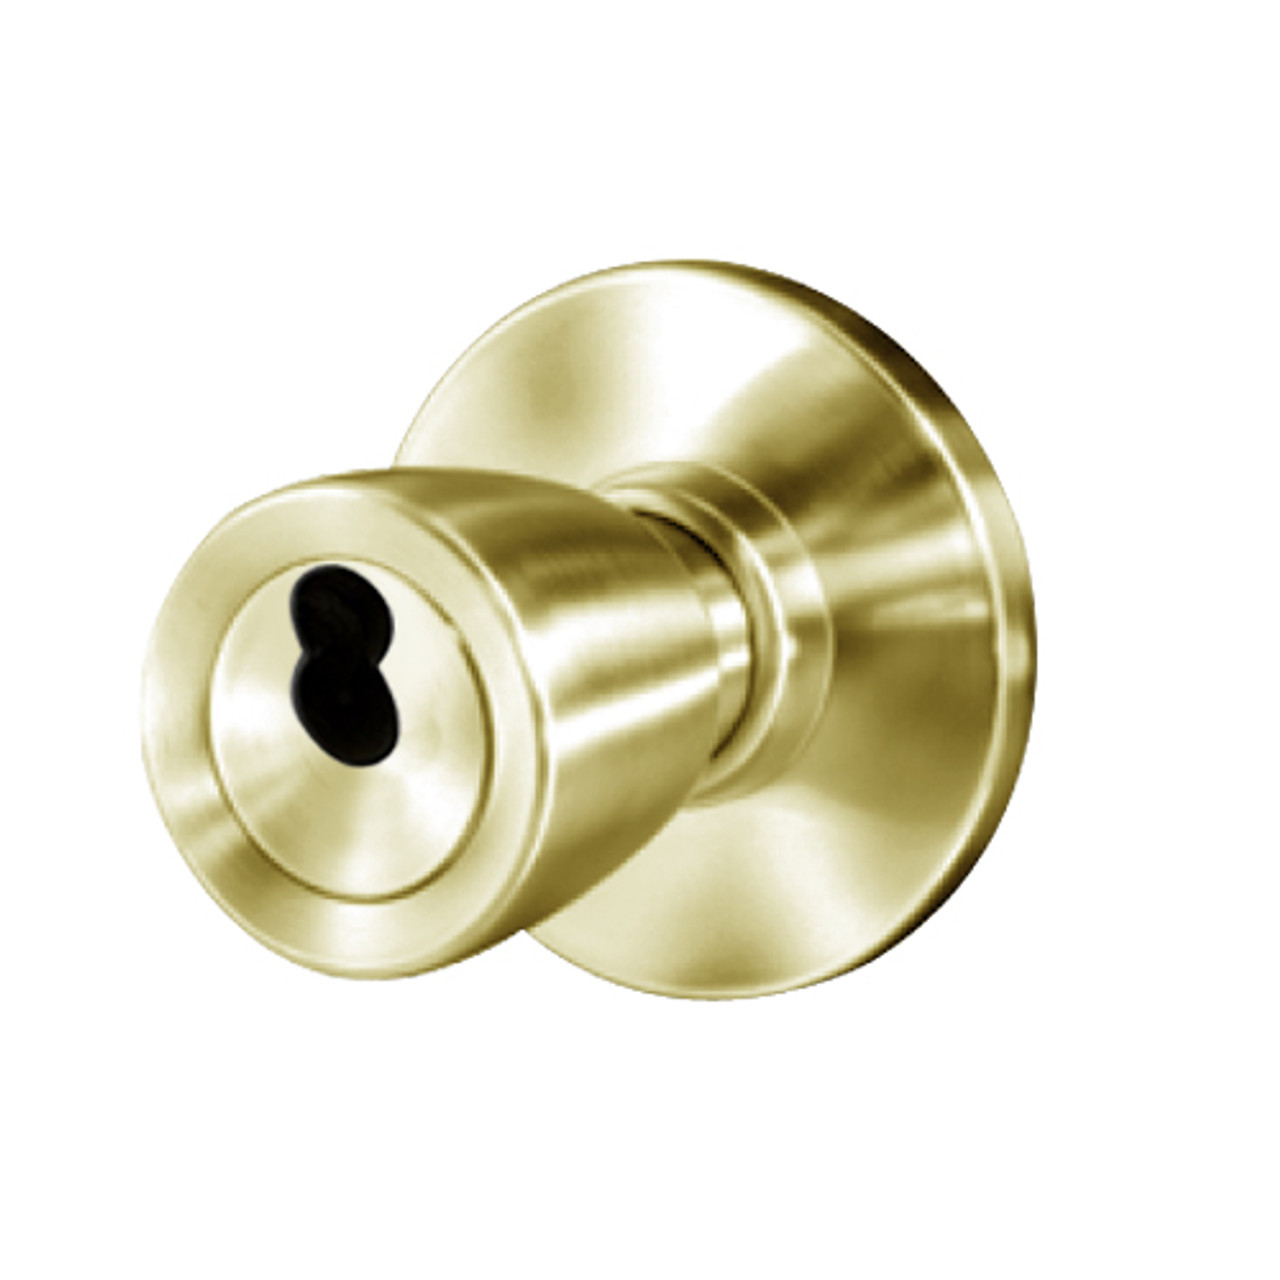 8K37YR6AS3606 Best 8K Series Exit Heavy Duty Cylindrical Knob Locks with Tulip Style in Satin Brass